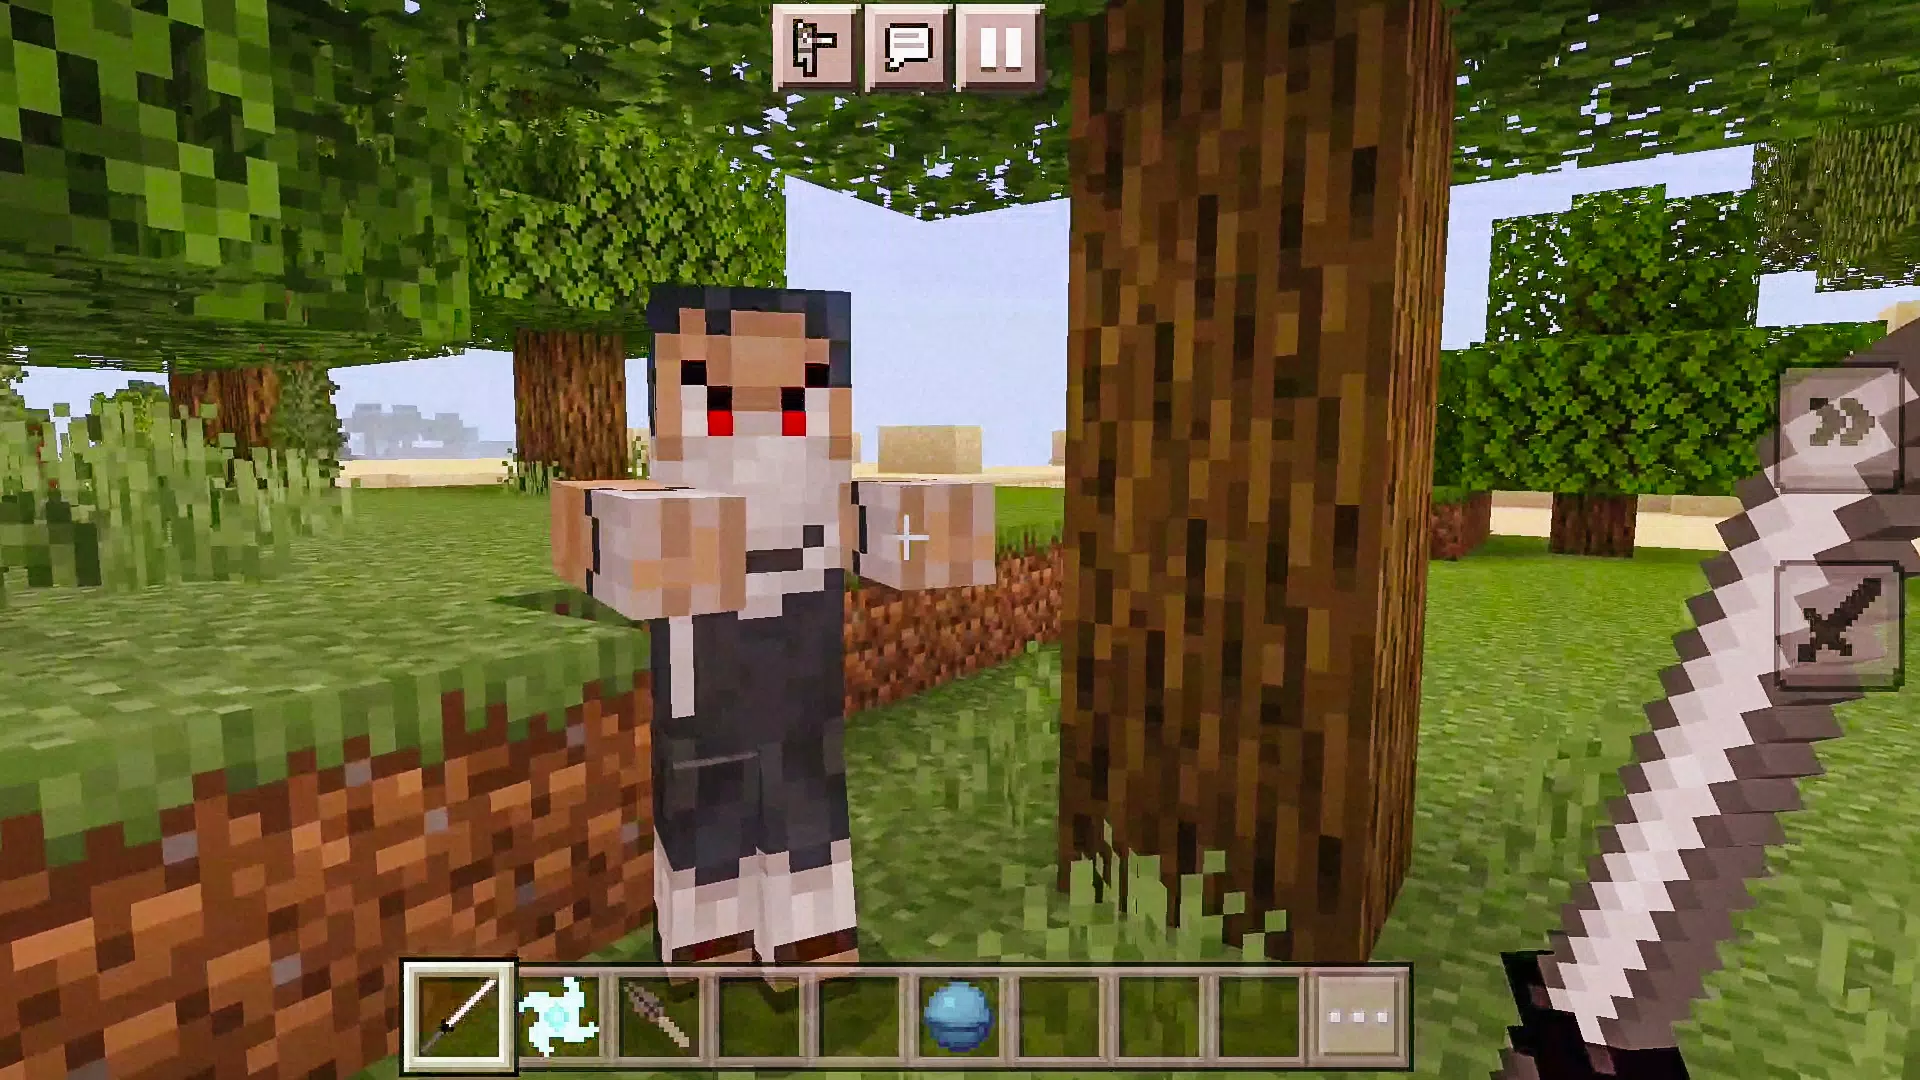 Naruto Mods for Minecraft PE - Apps on Google Play